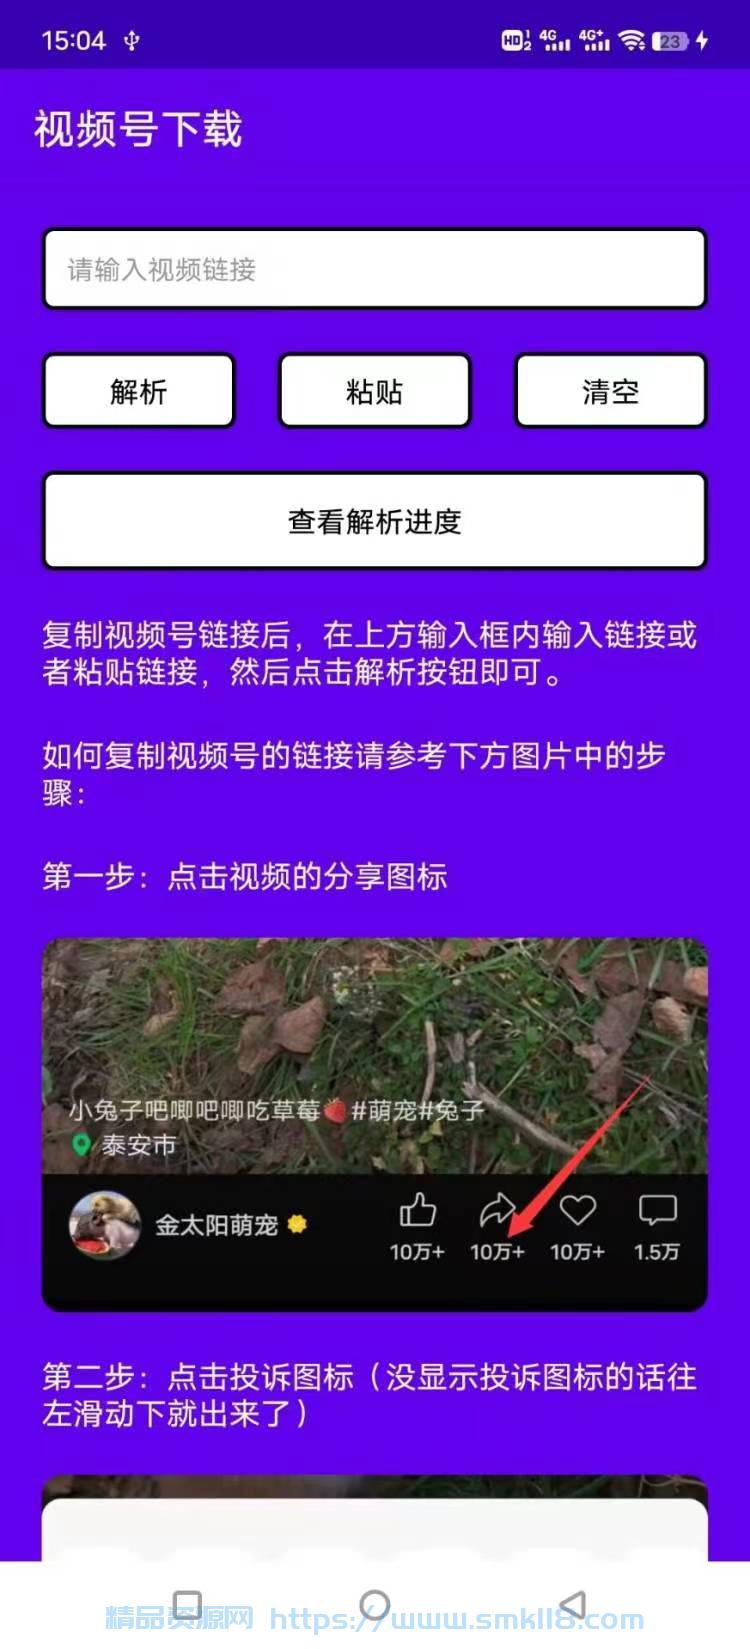 [Android] 视频号、快手、抖音、油管等去水印下载全部搞定!